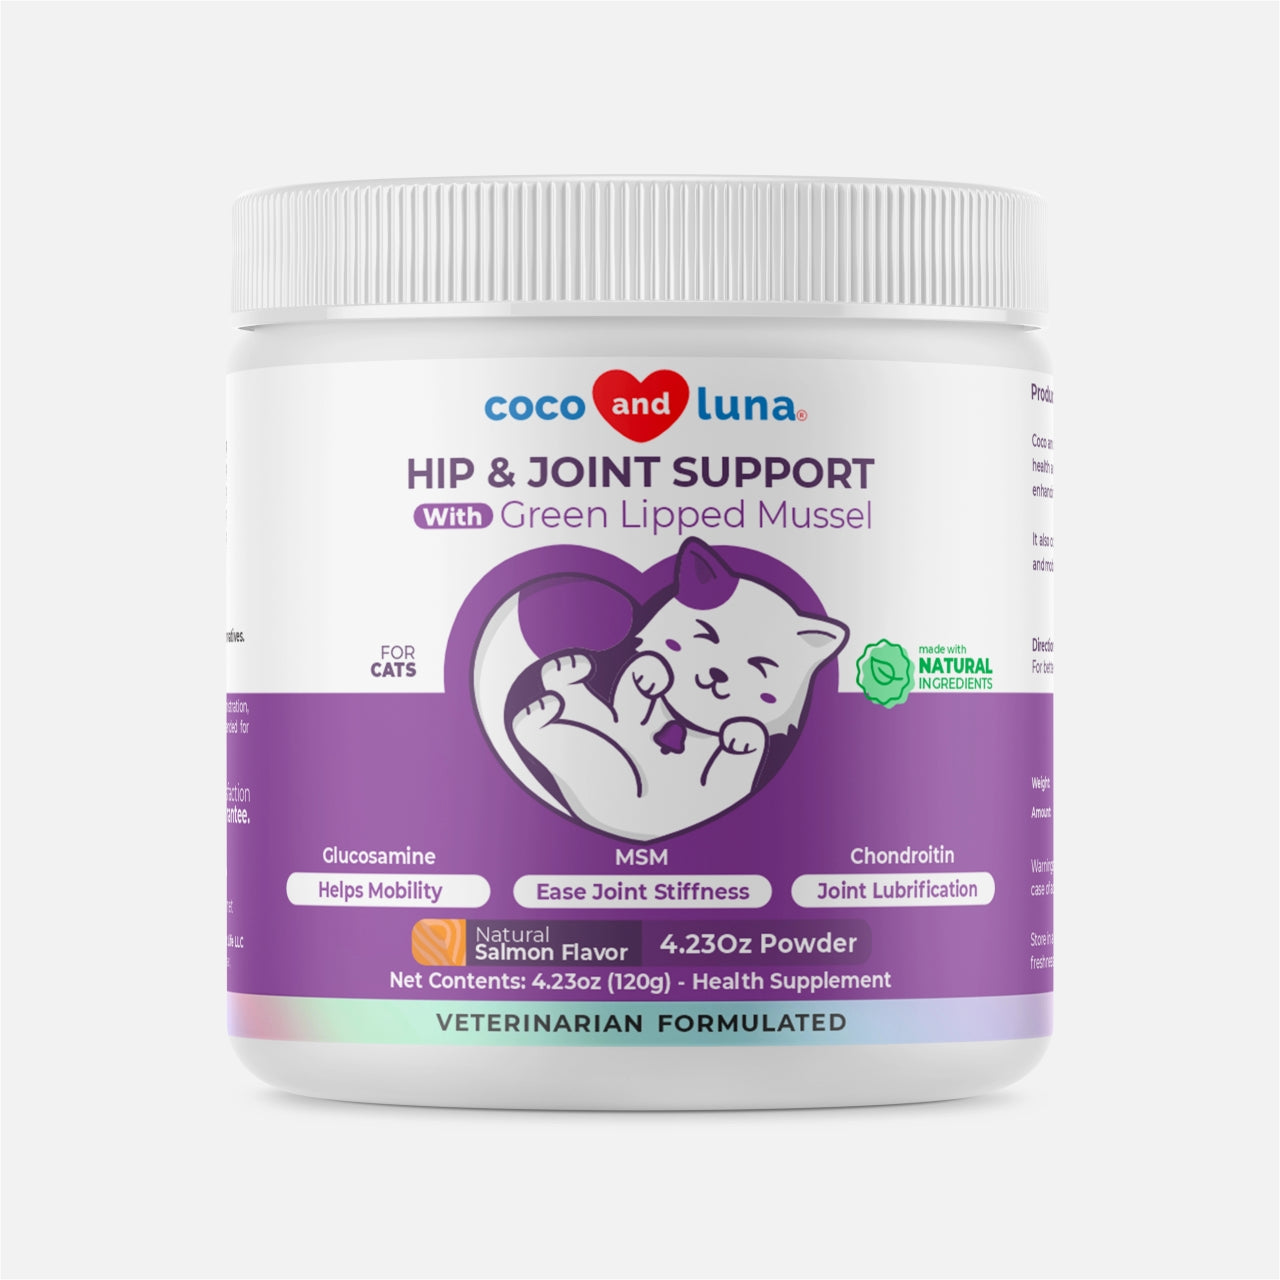 Hip and Joint Support for Cats - 4oz Powder - Coco and Luna